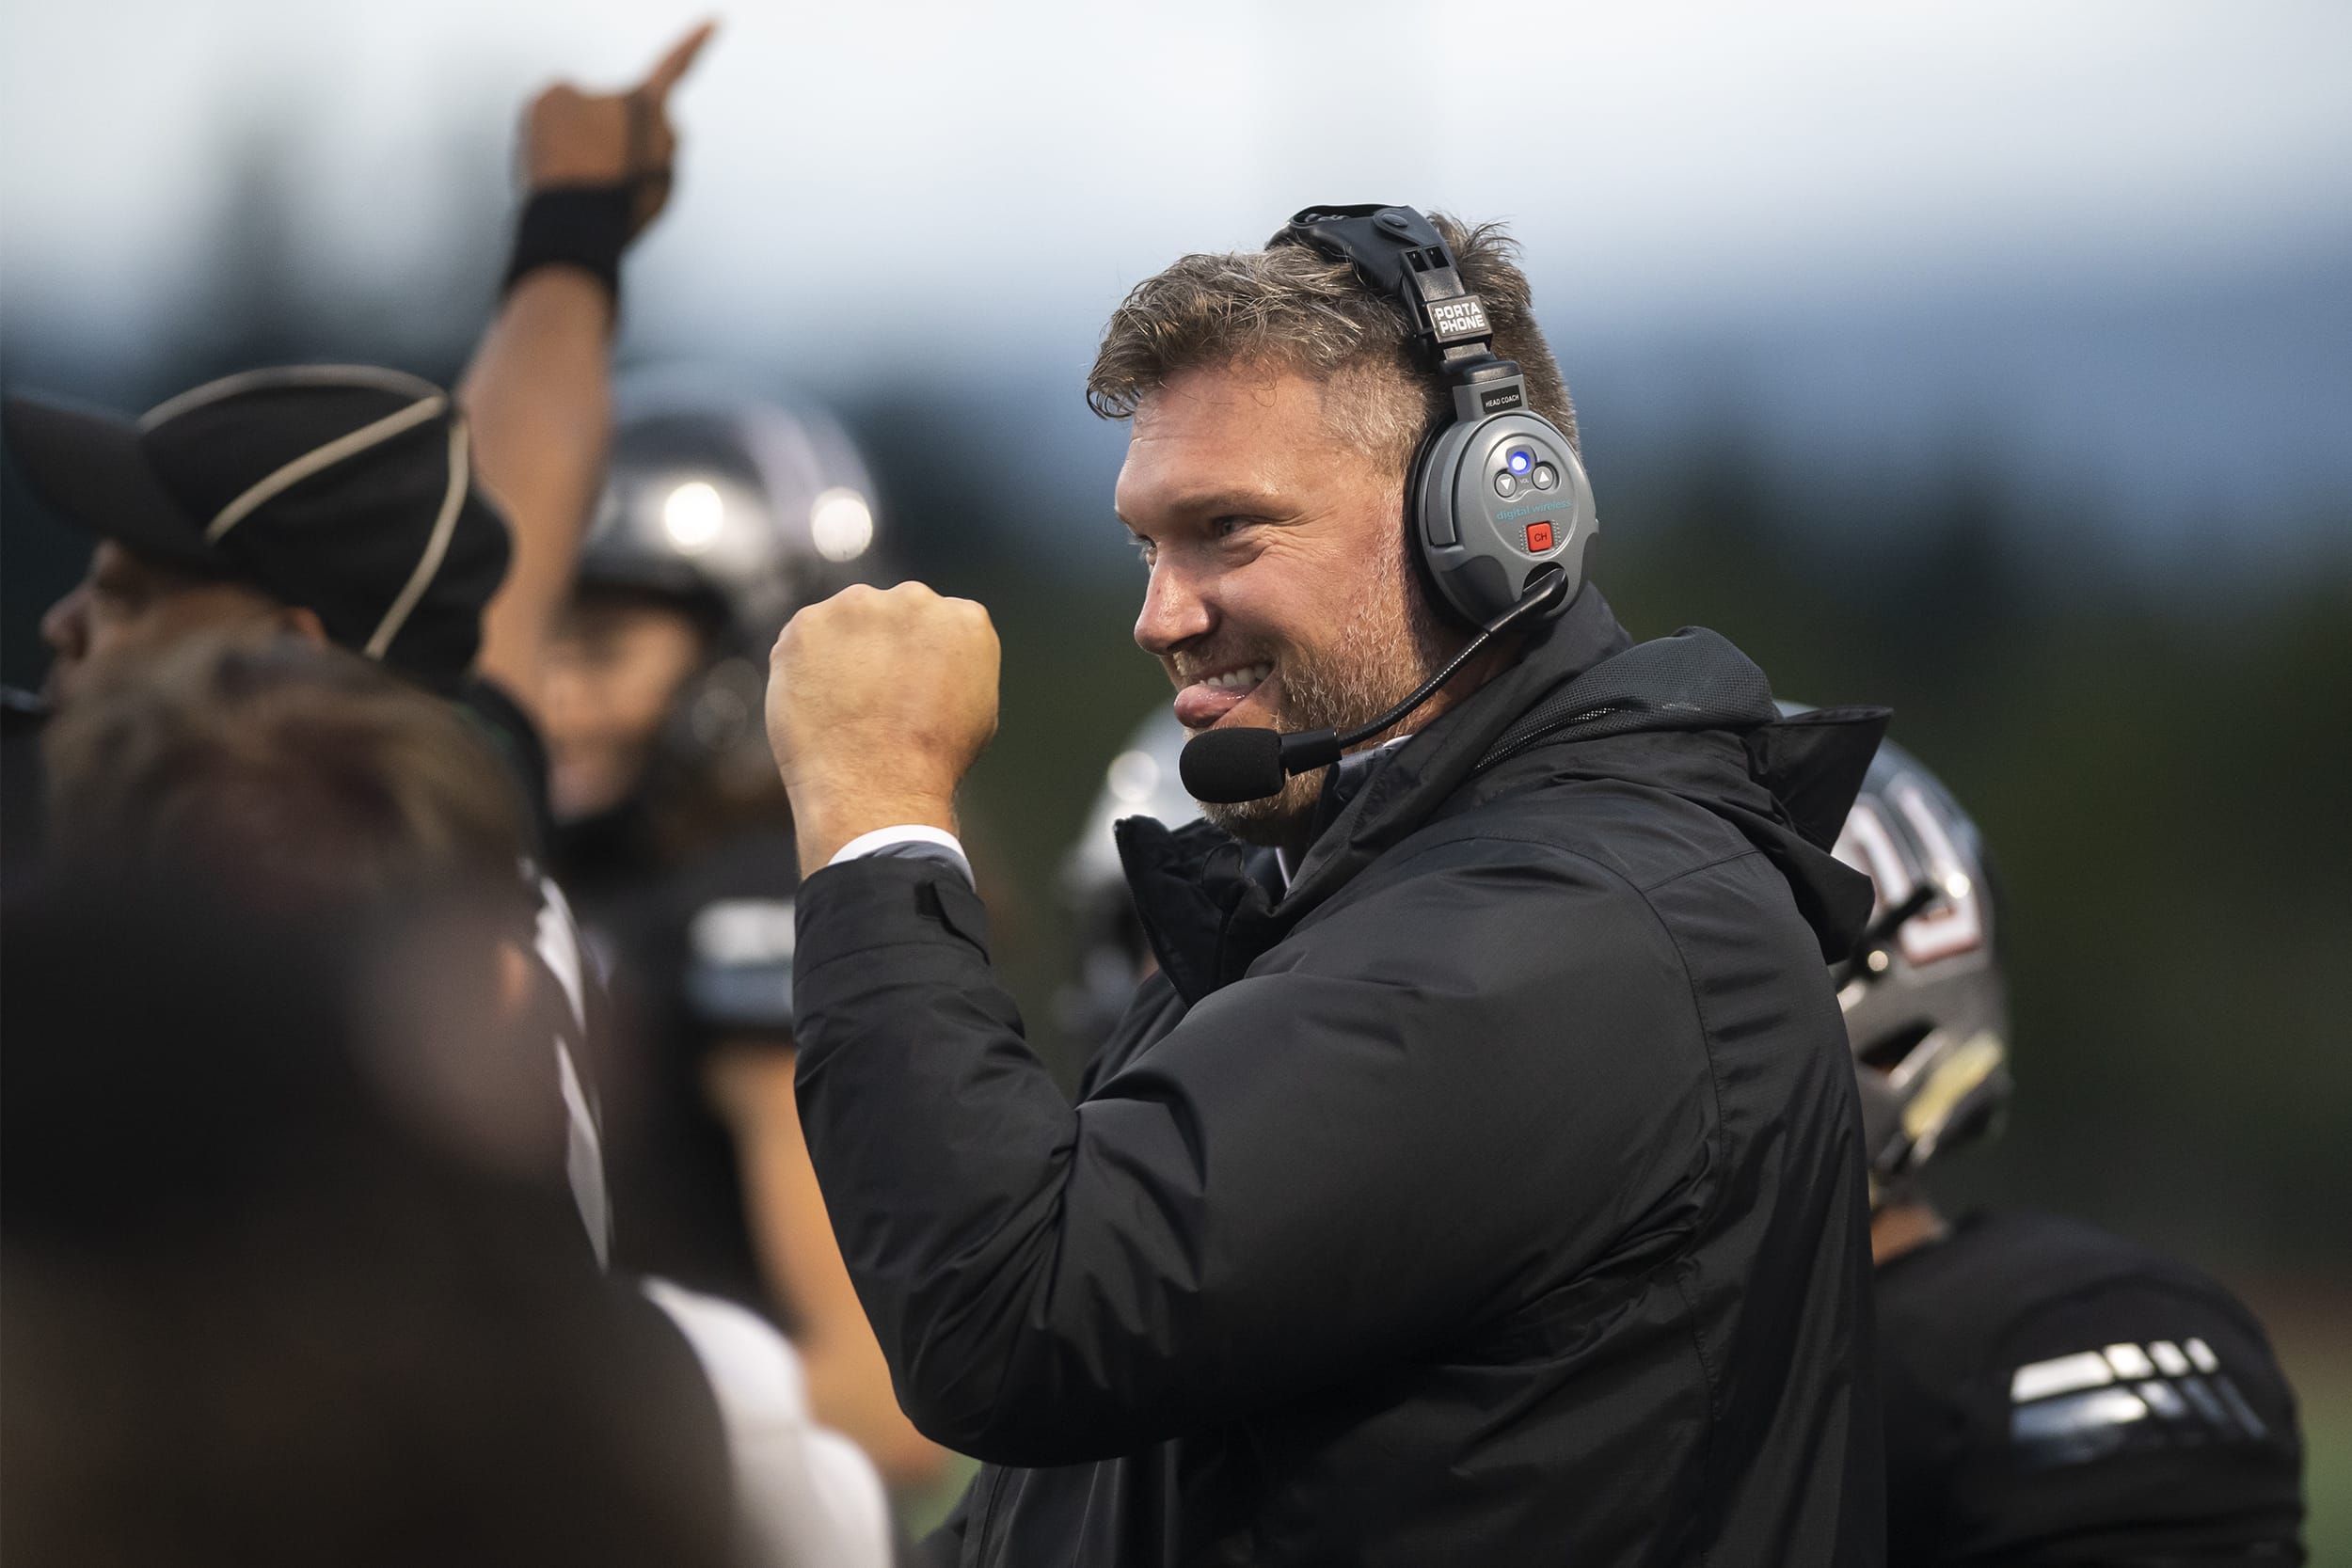 Union Head Coach Rory Rosenbach celebrates an interception that turned the tide of the 4th carter against Chiawana at McKenzie Stadium on Friday night, Sept 27, 2019.